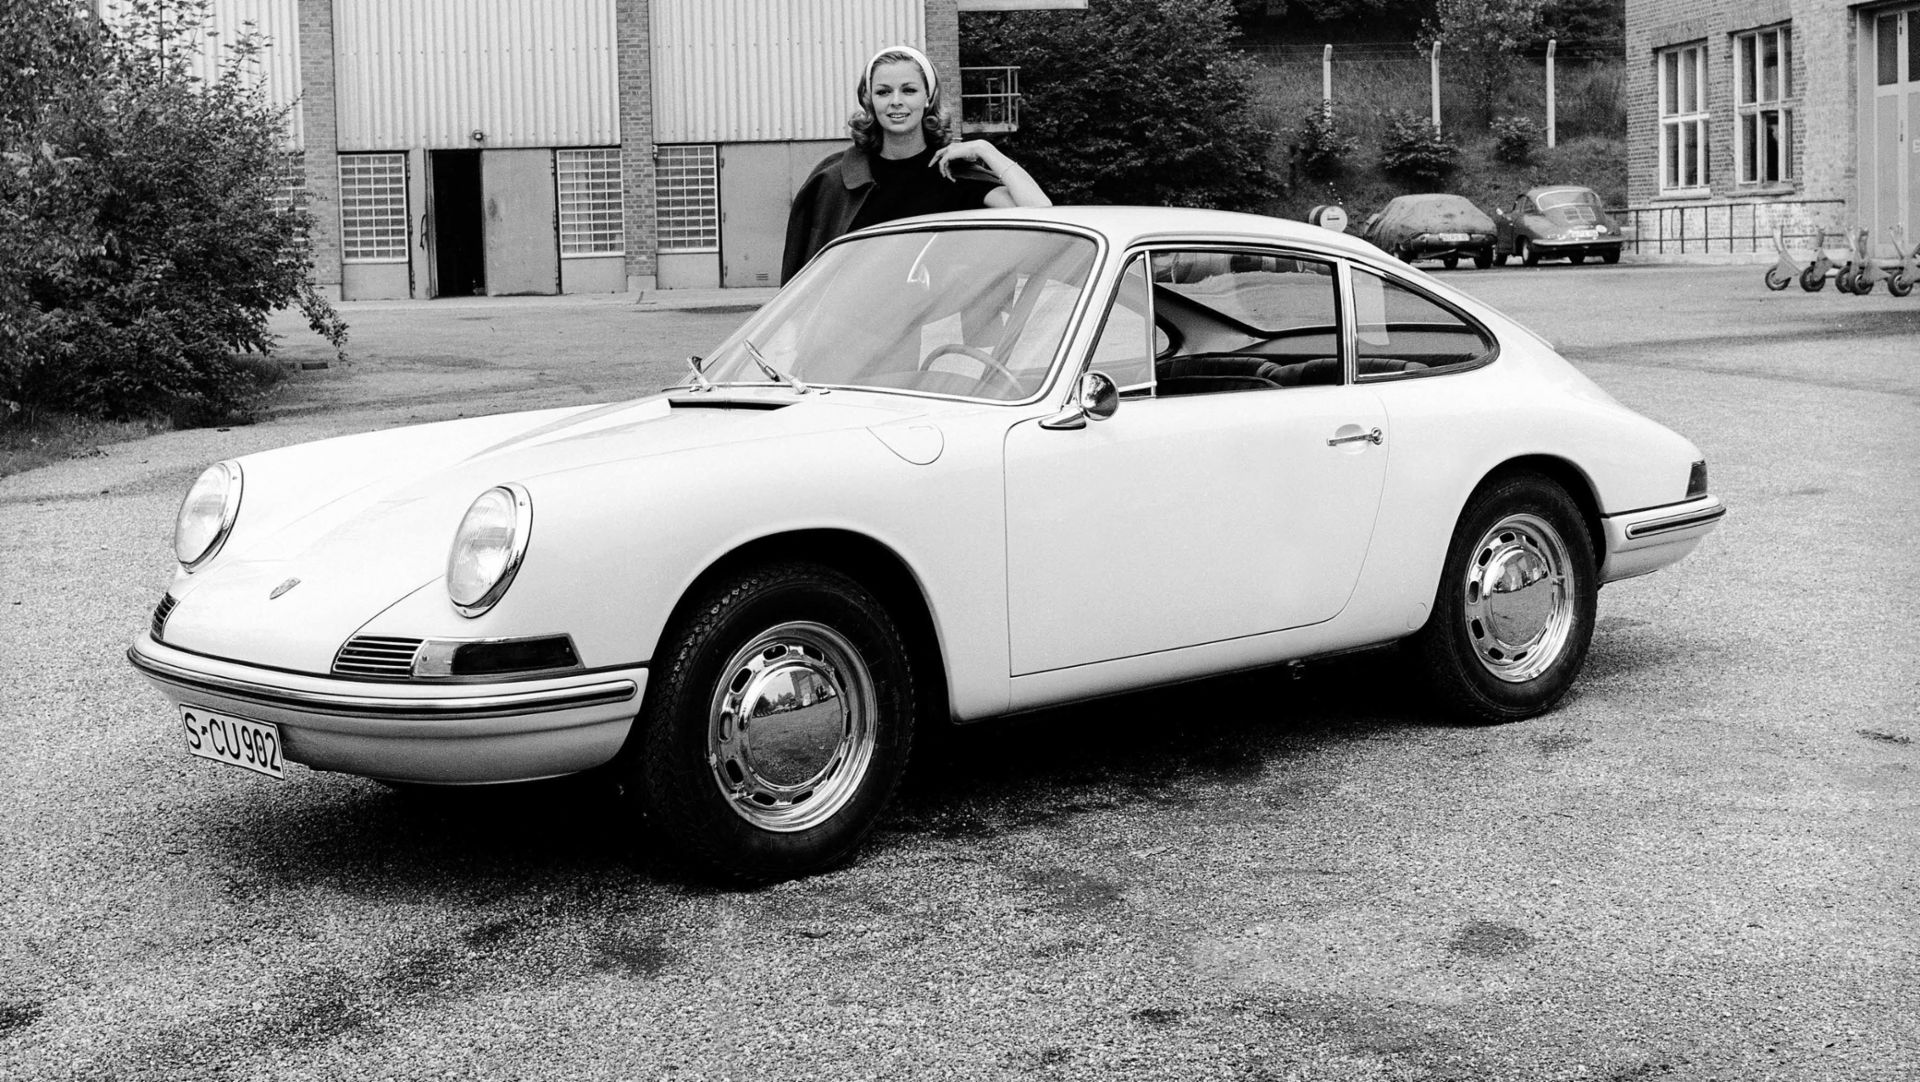 Black and white image of woman standing behind first Porsche 911